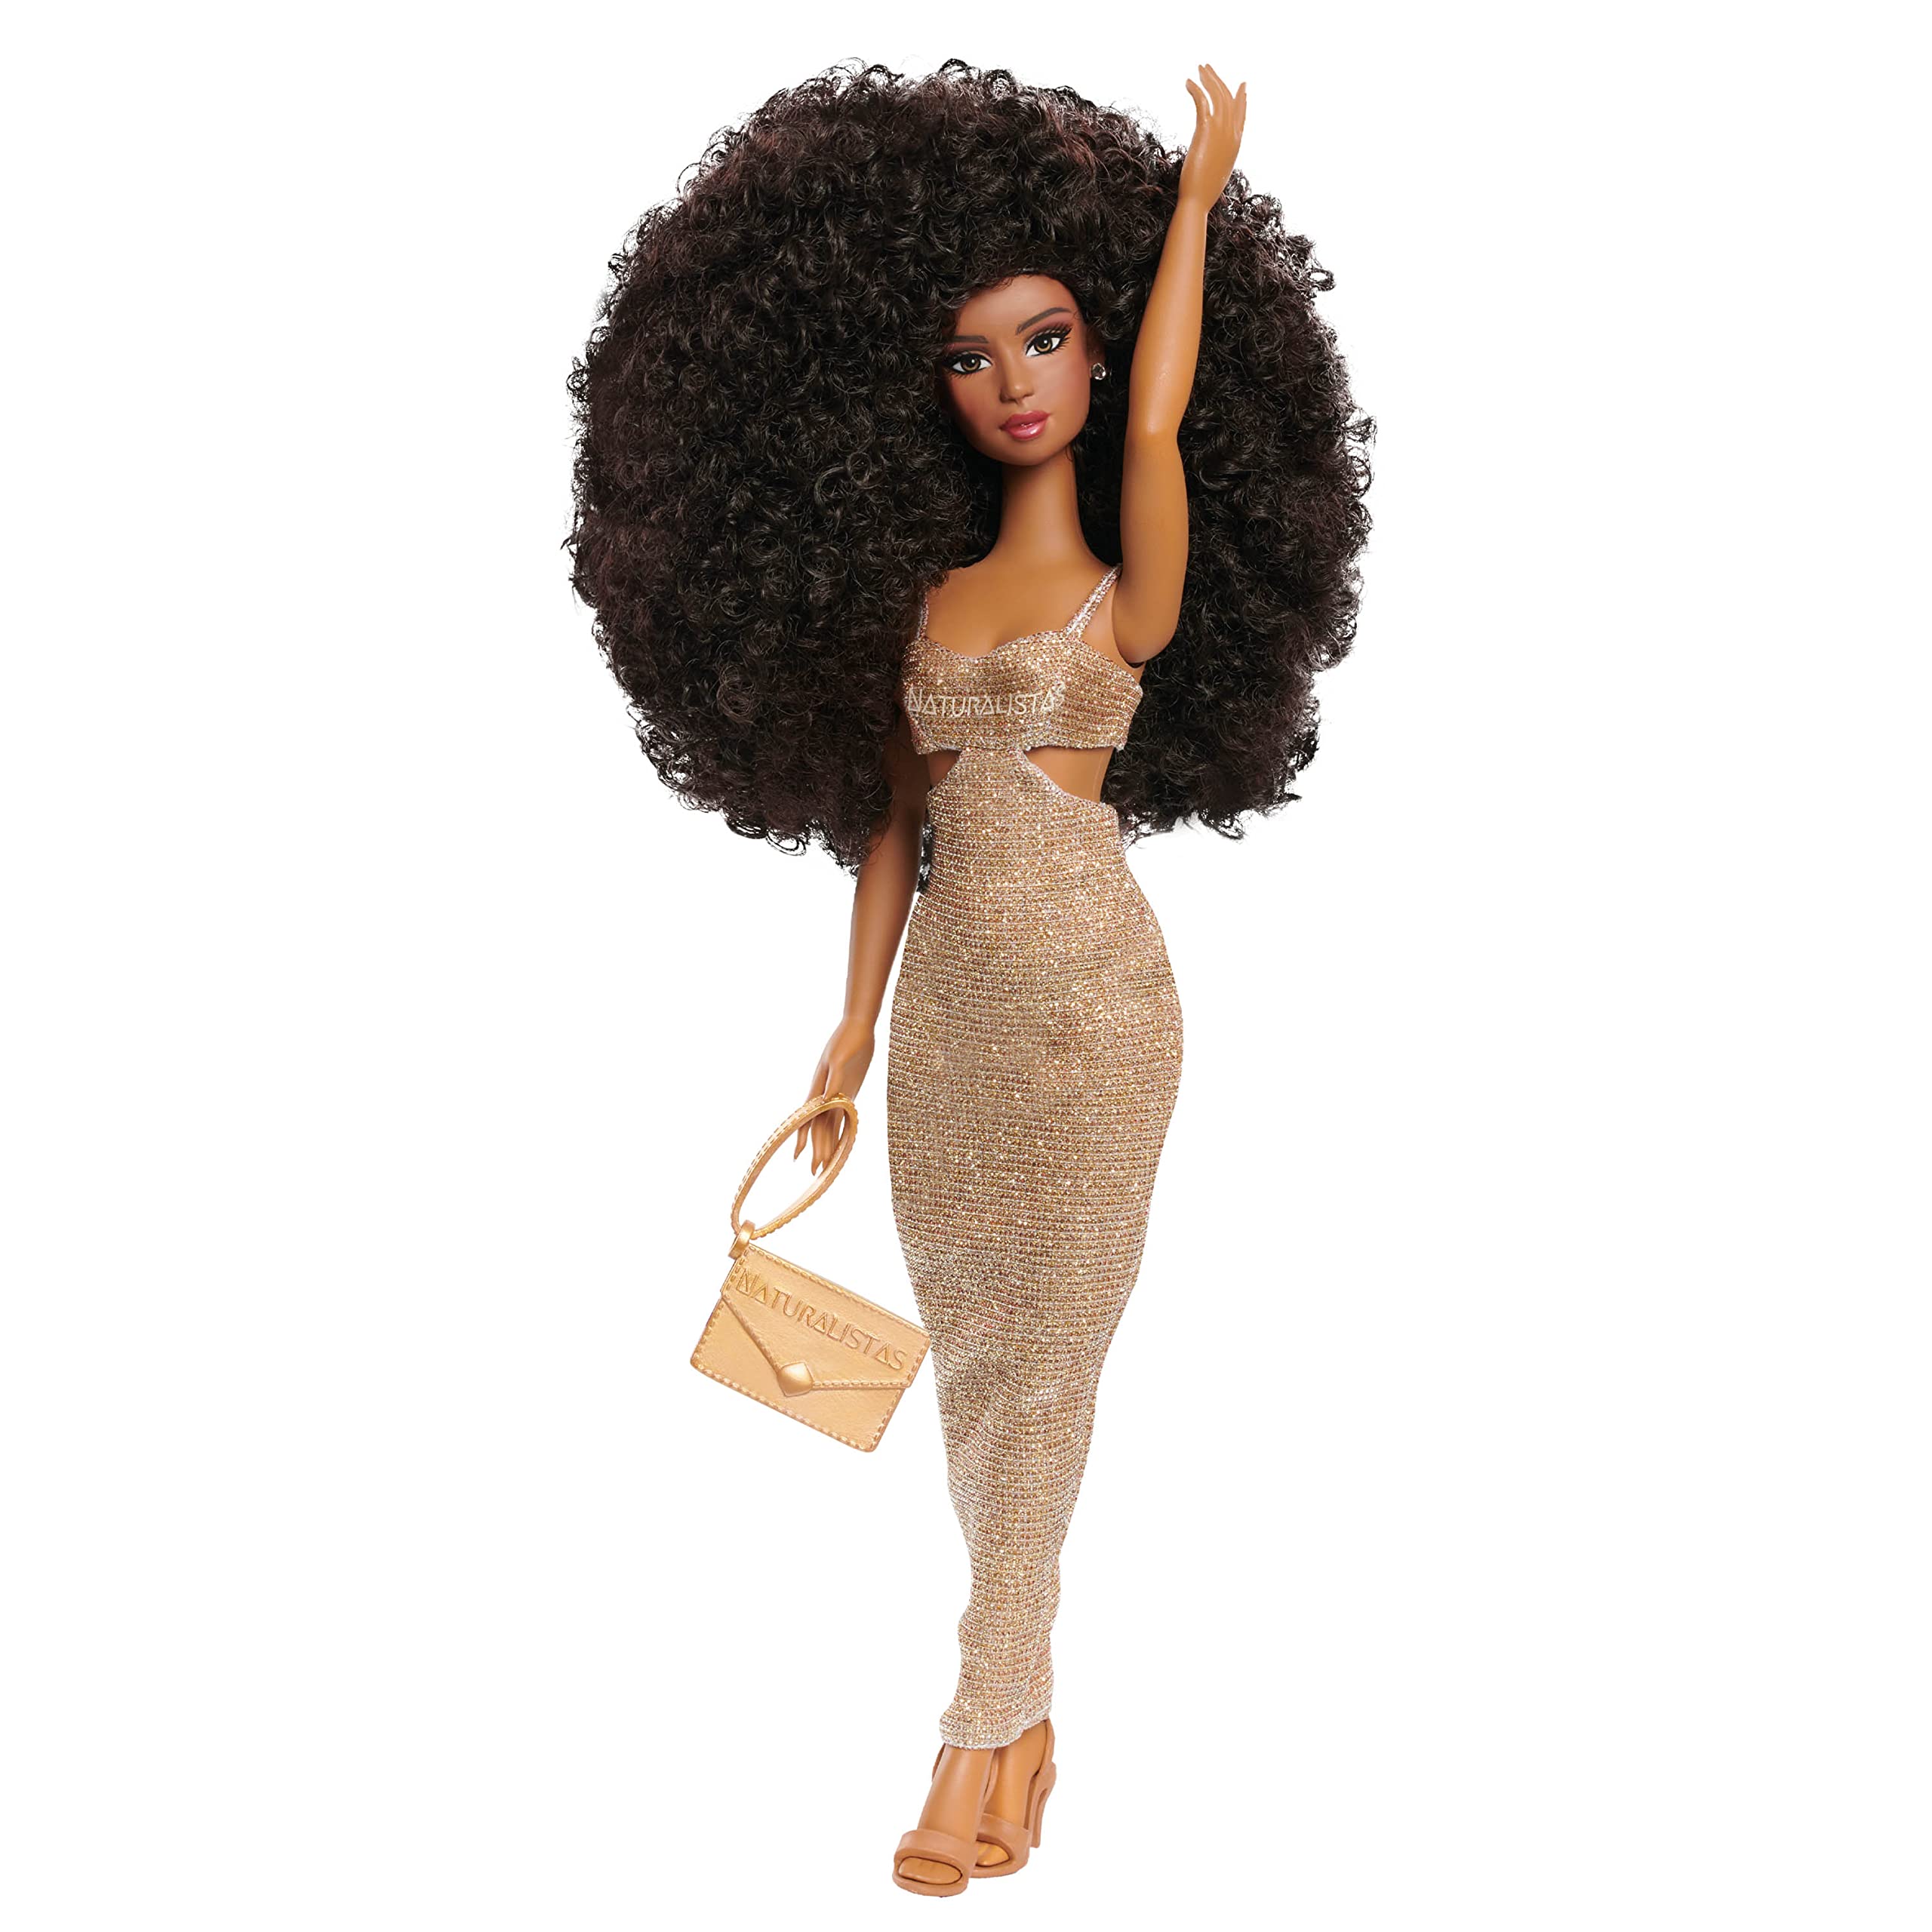 Naturalistas 11.5-inch Fashion Doll and Accessories Dayna, Curly 3C Textured Hair, Medium Brown Skin Tone, Designed and Developed by Purpose Toys